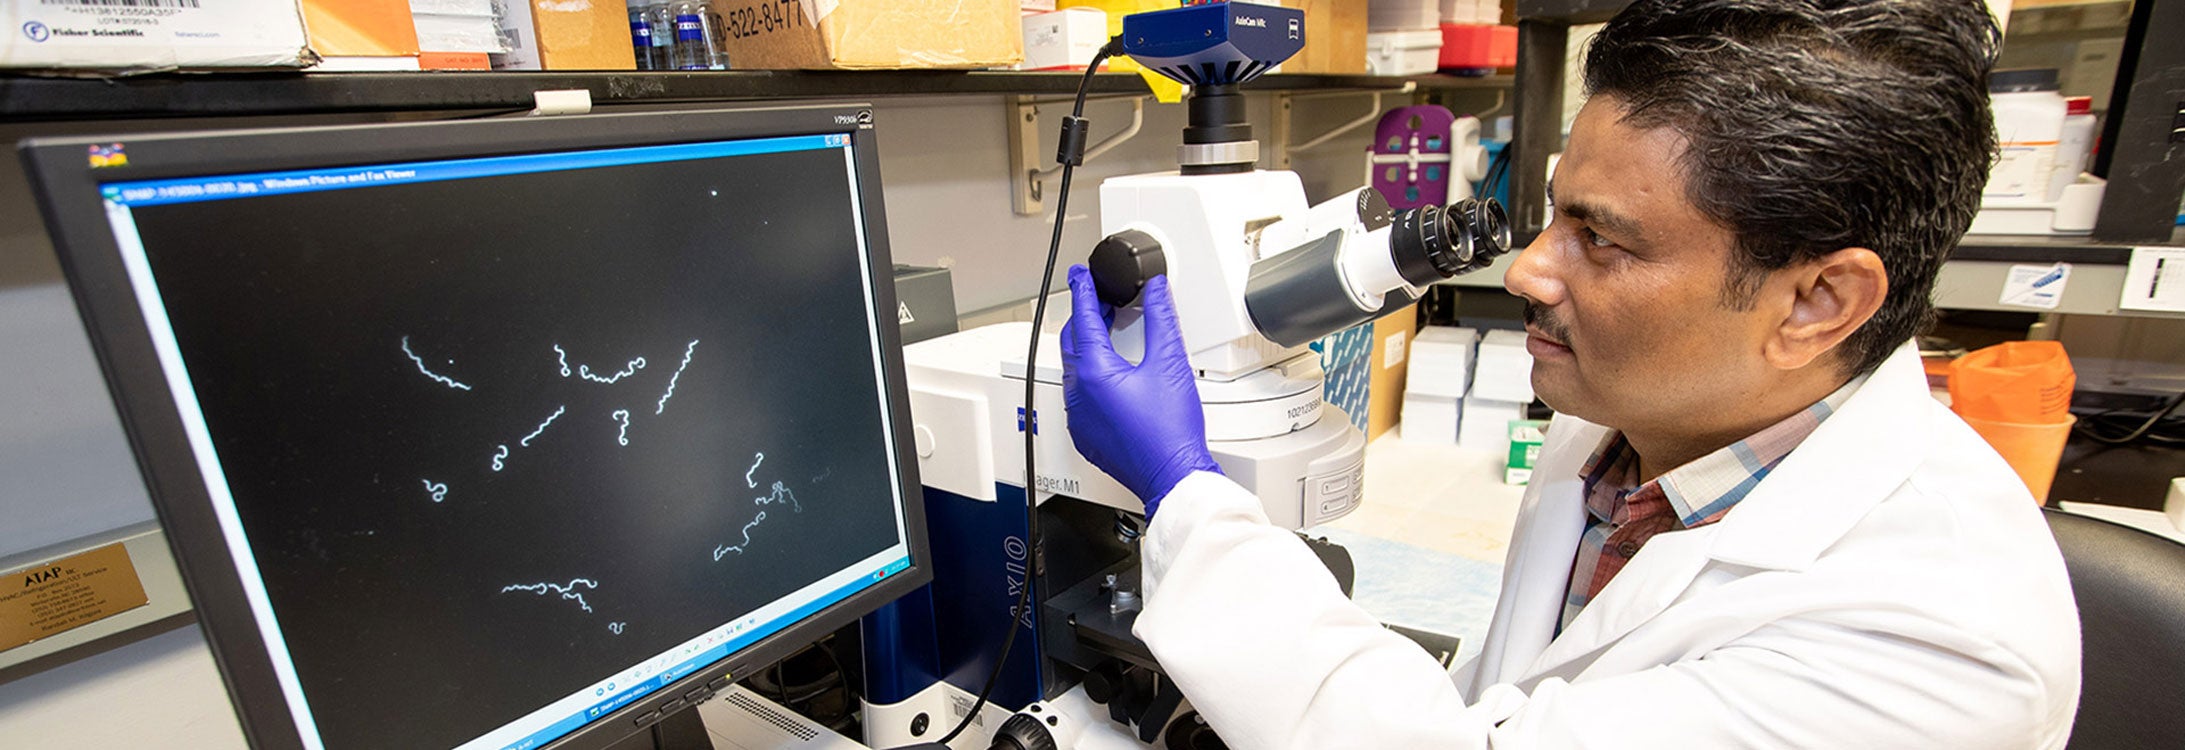 Dr. Motaleb views the bacteria that cause Lyme disease through a microscope